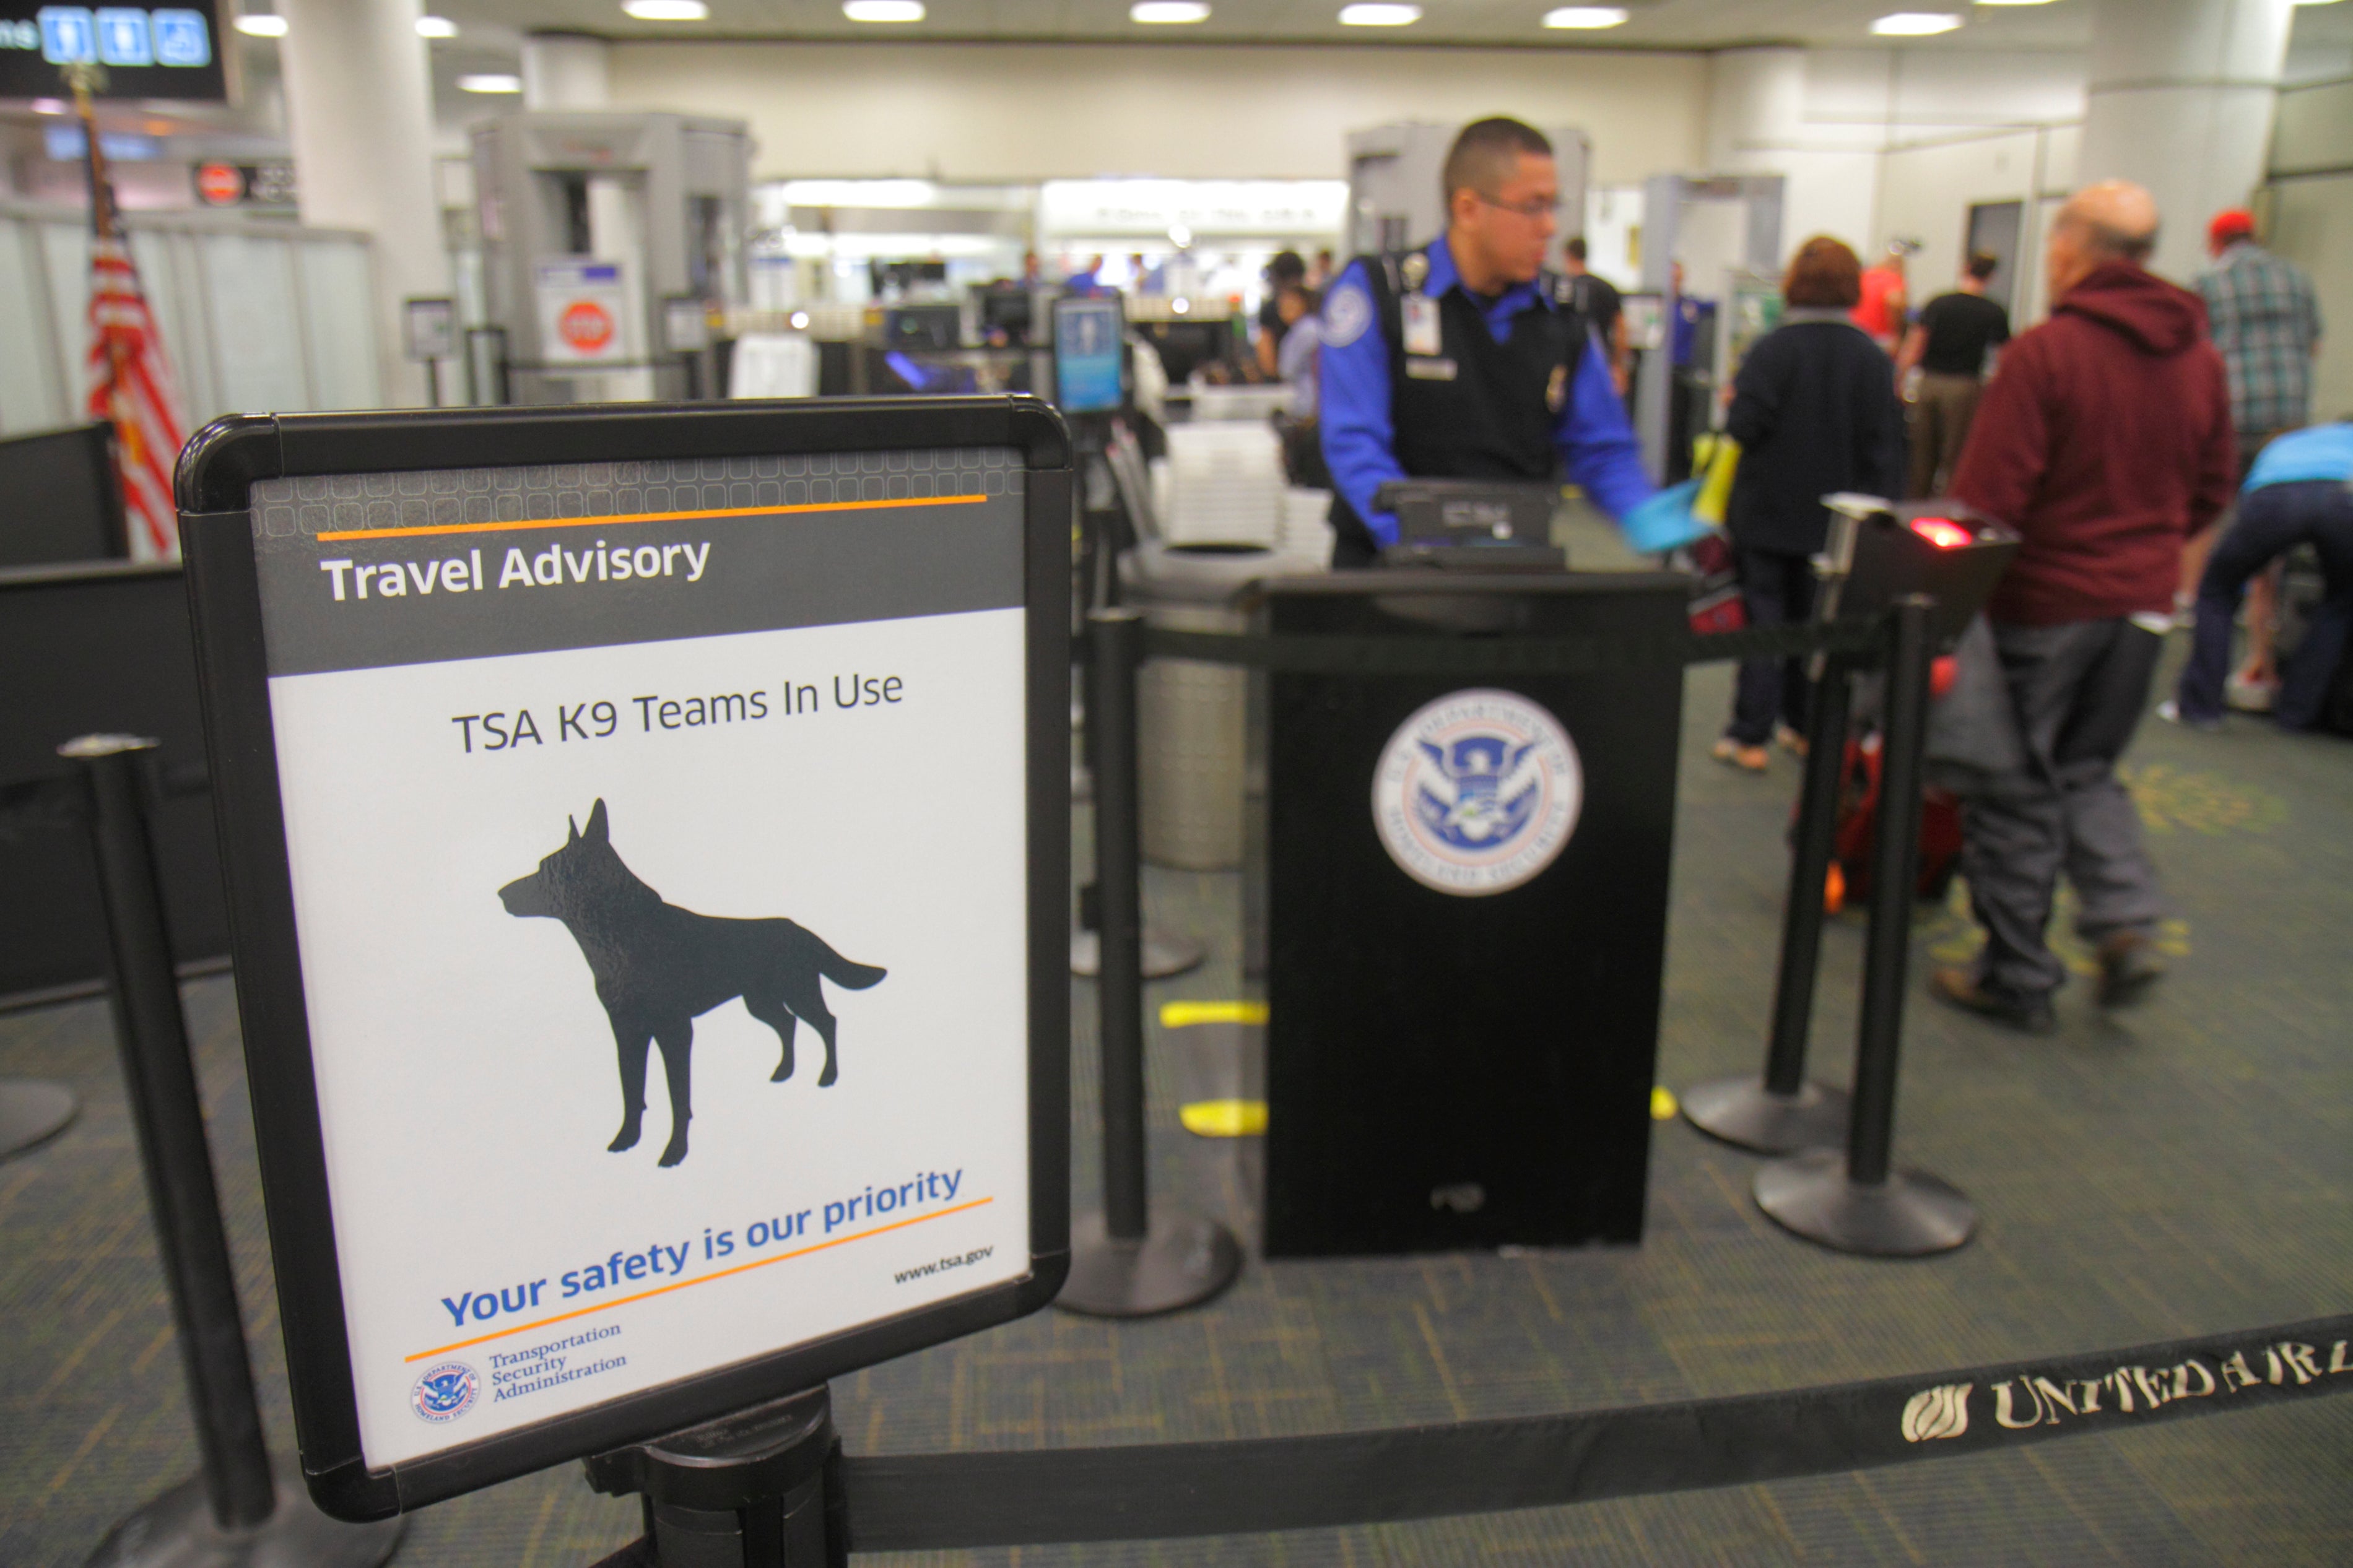 Transportation Security Administration, travel advisory sign at Airport.